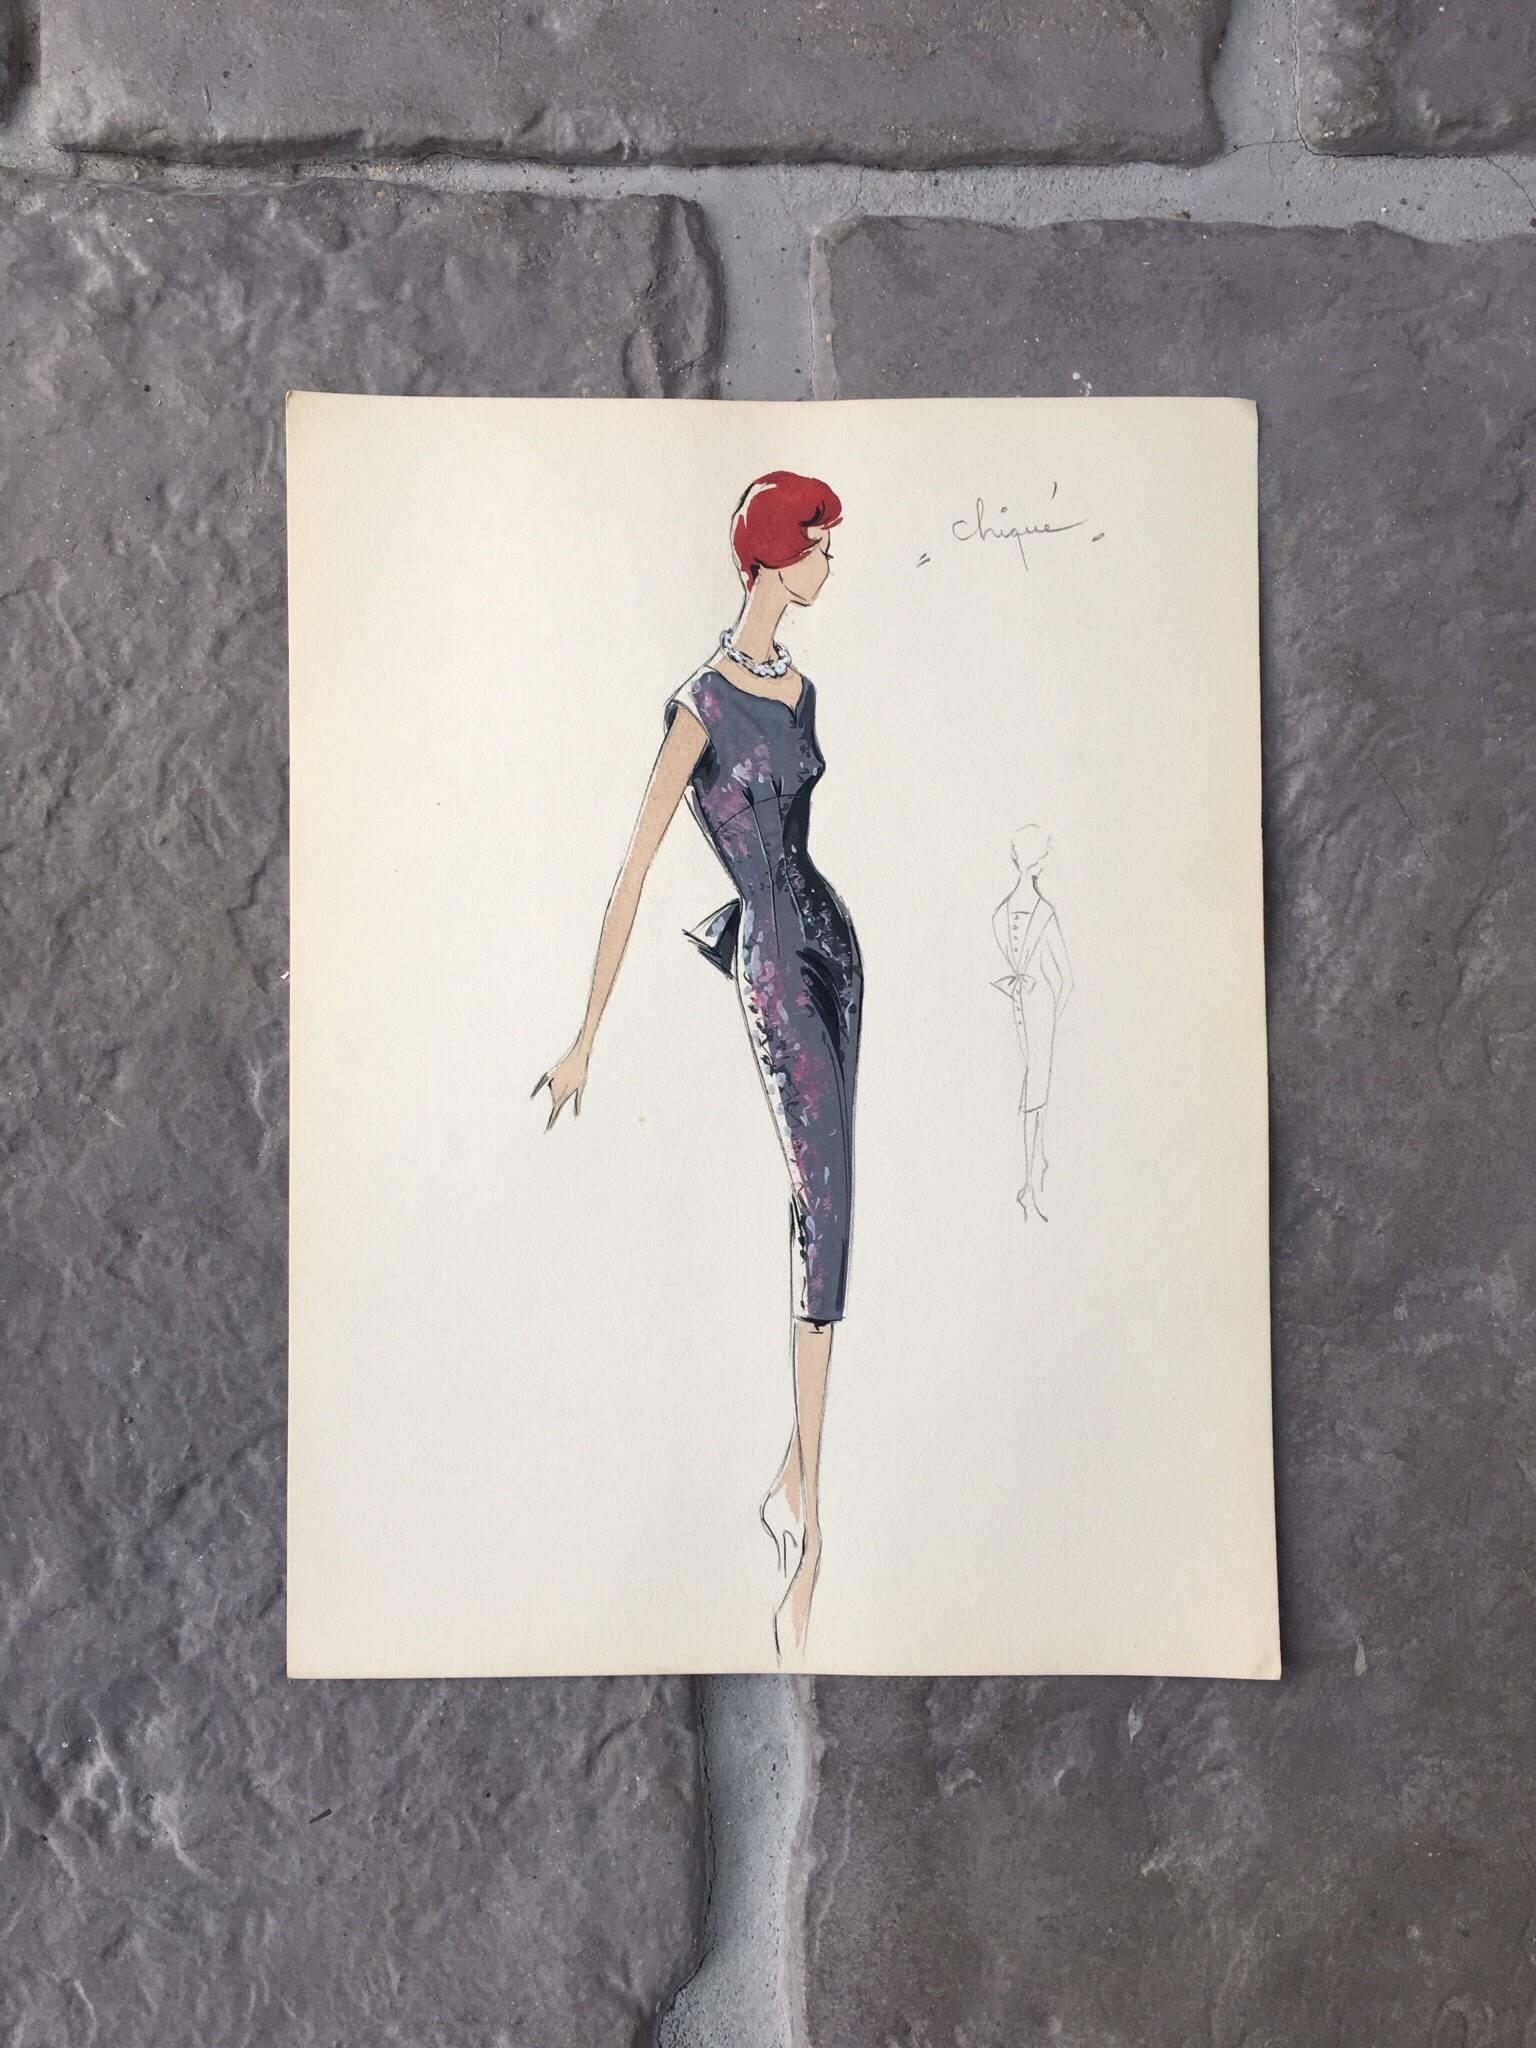 Lady in Elegant 1950's Floral Dress Parisian Fashion Illustration Sketch - Painting by Unknown